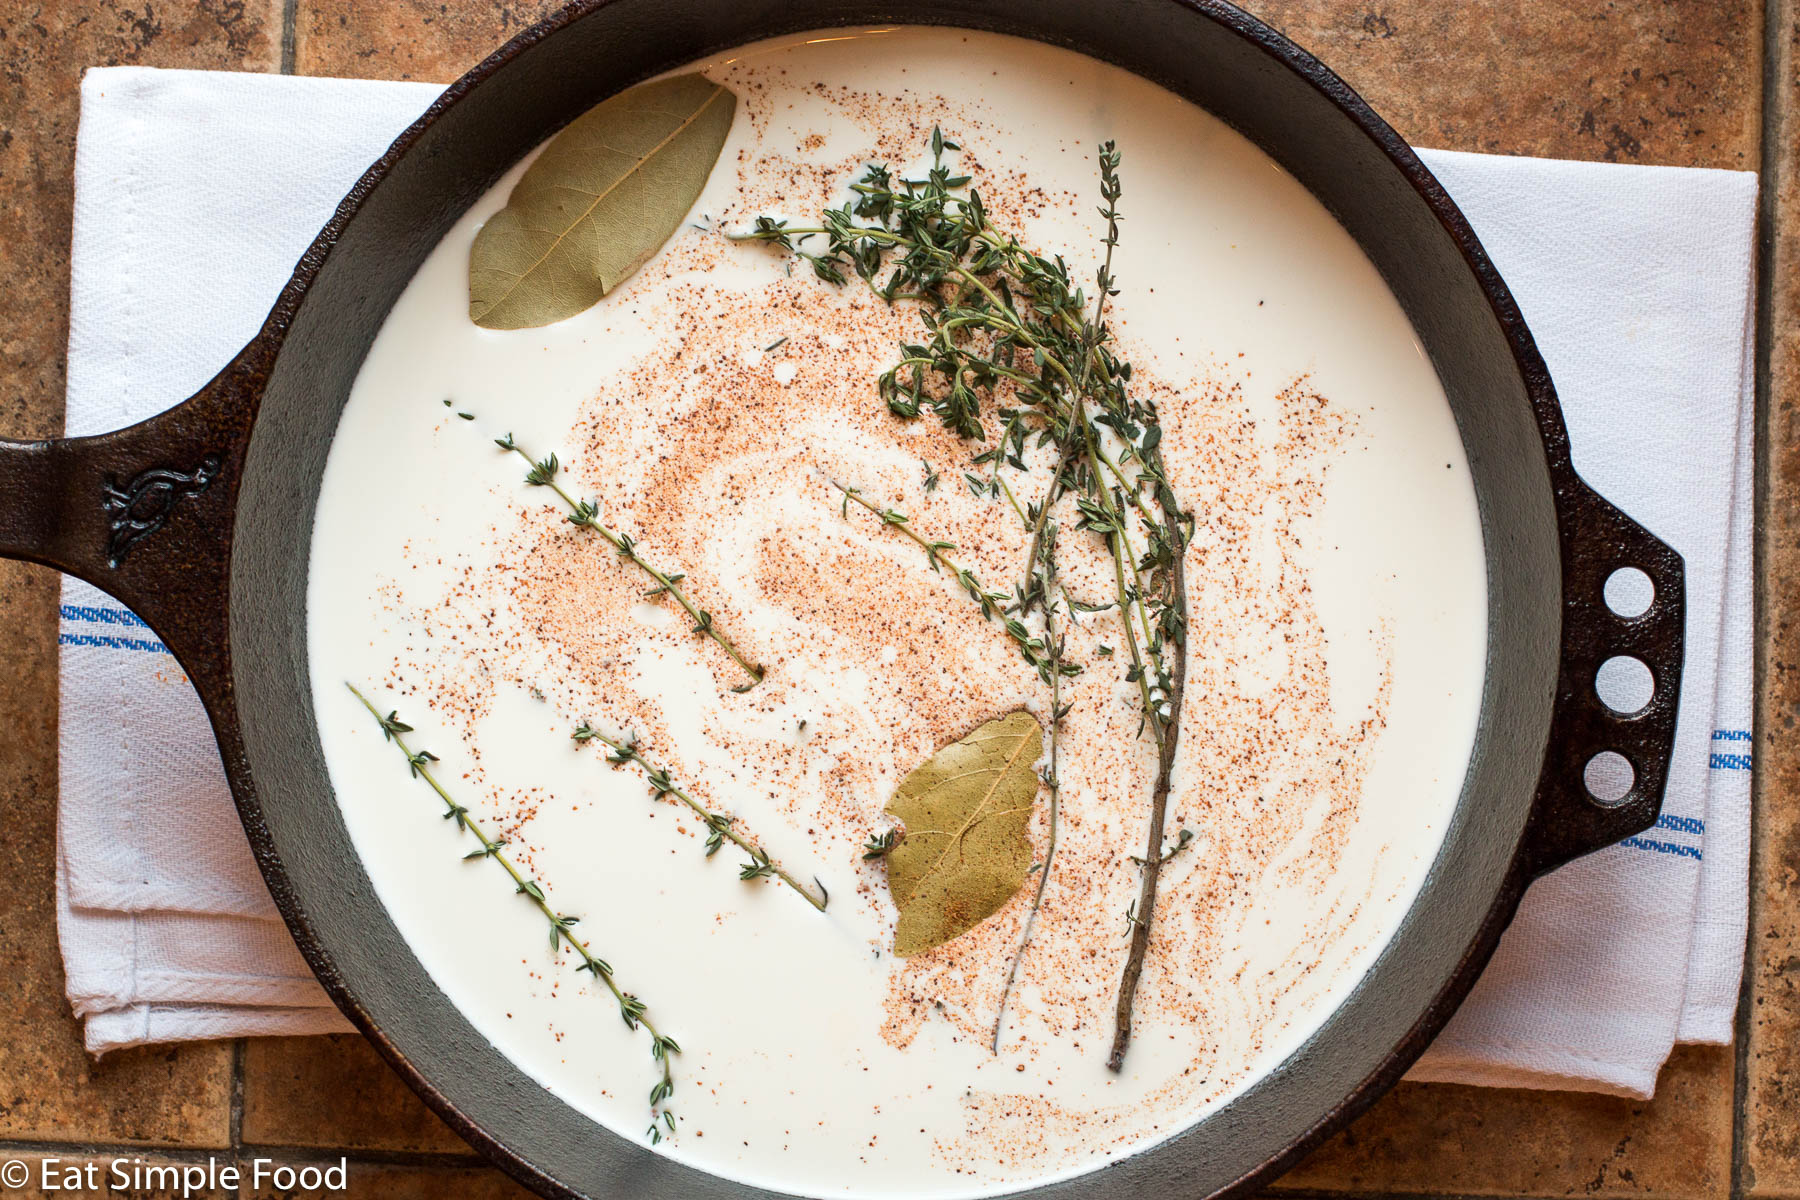 Cream, nutmeg, bay leaves, and thyme in heavy whipping cream in a cast iron skillet.